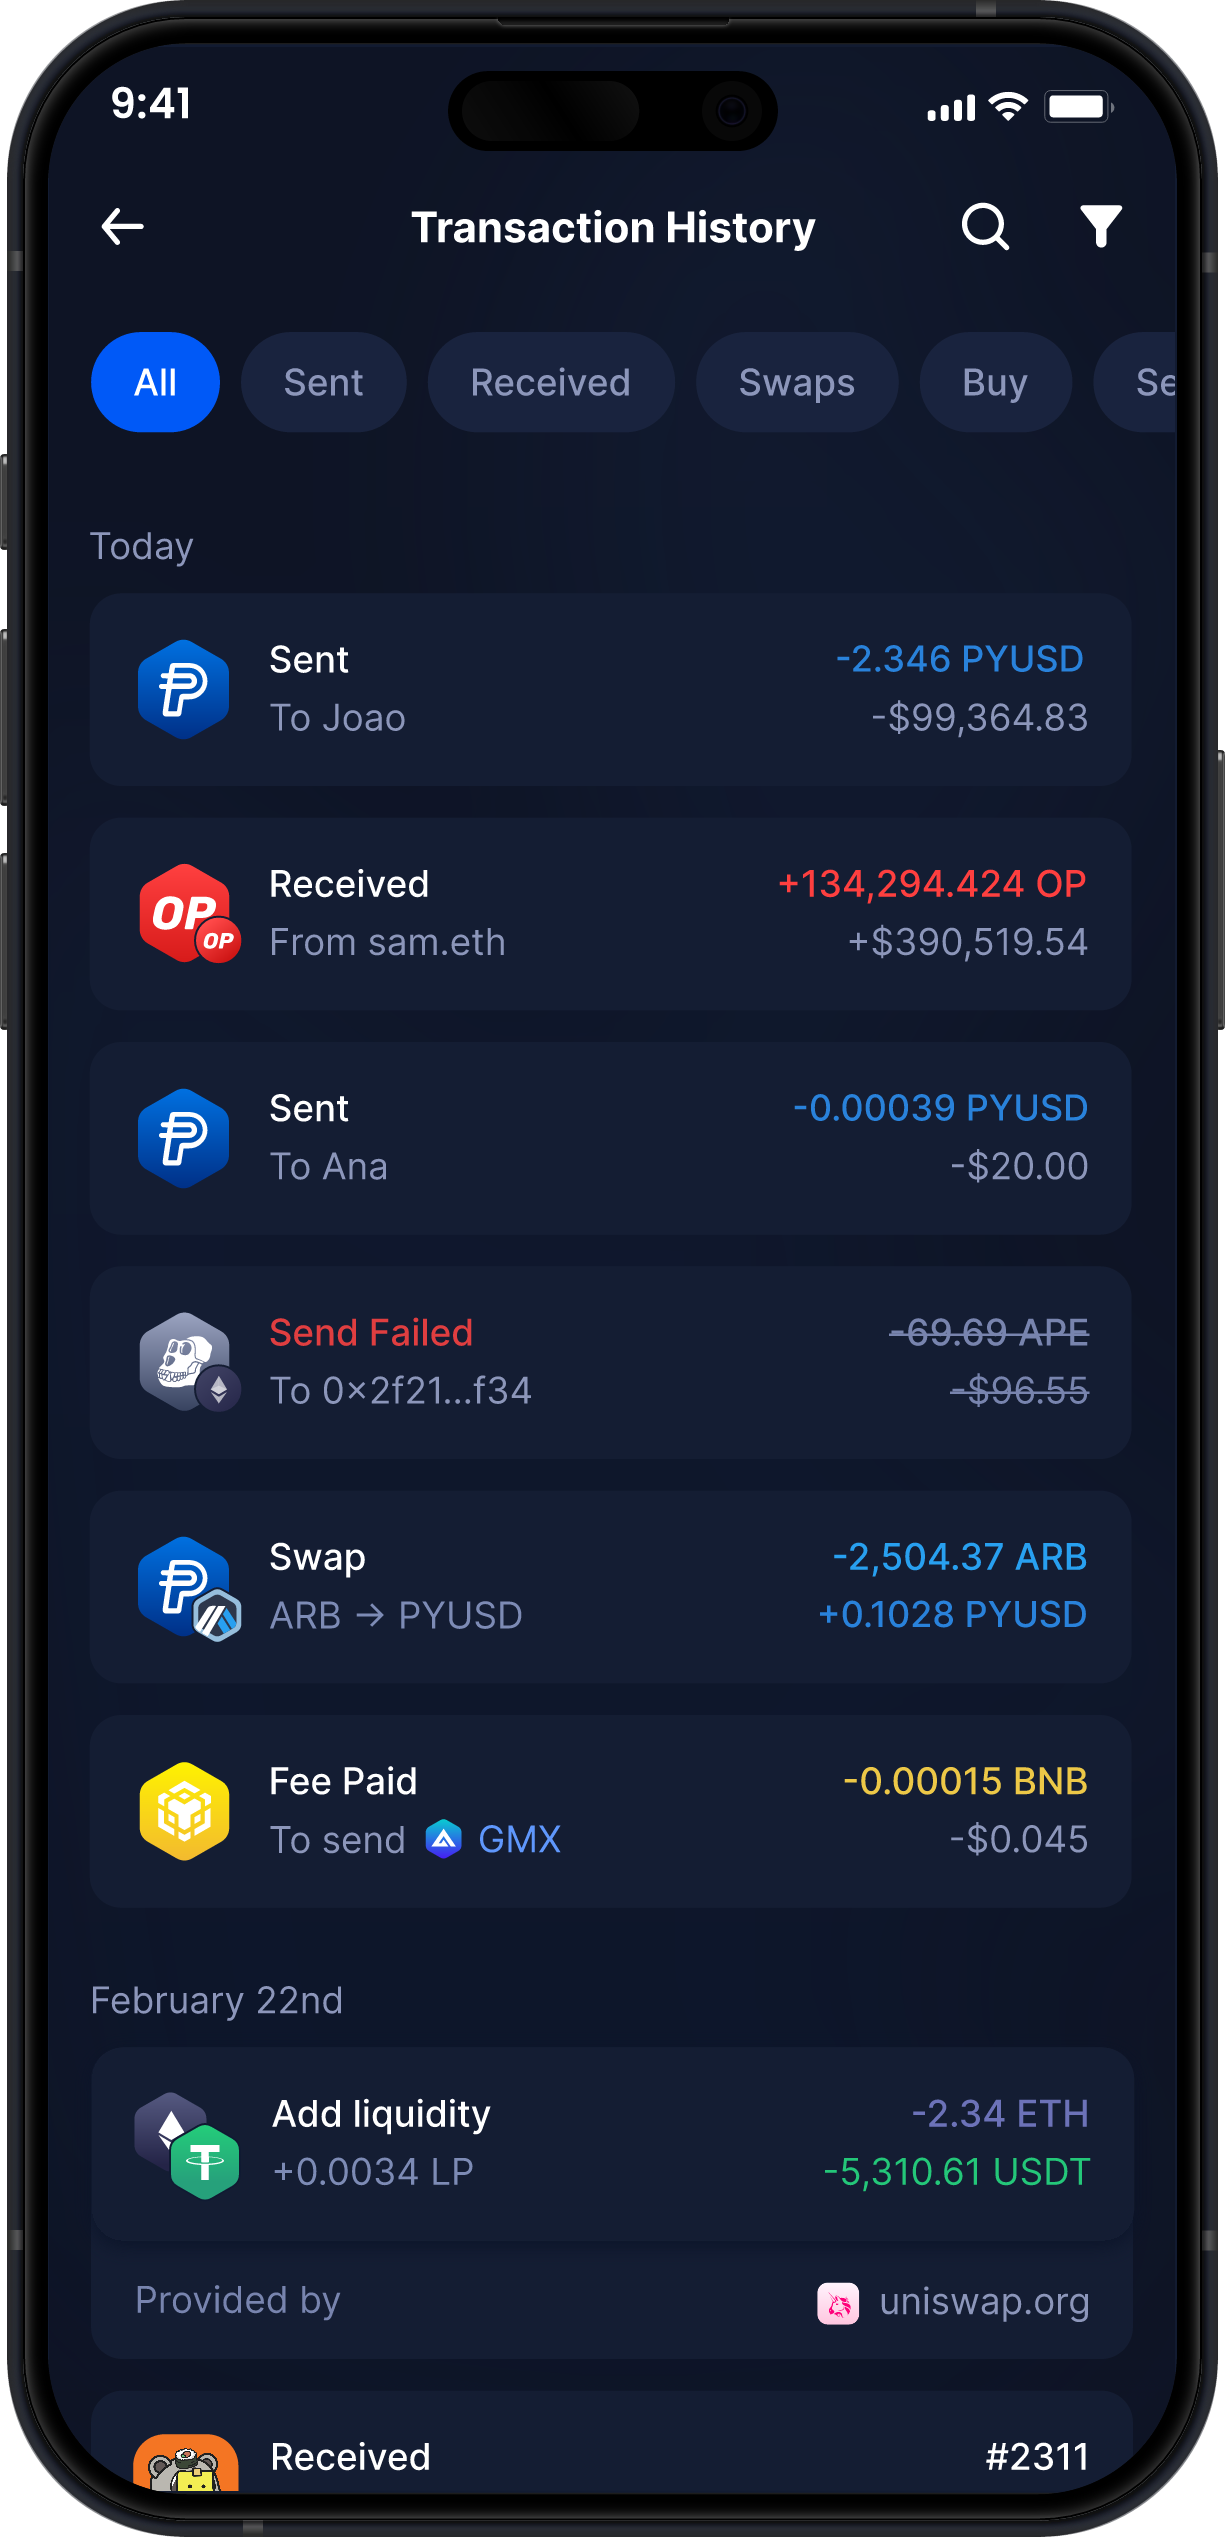 Infinity Mobile PayPal USD Wallet - Complete PYUSD Transaction History